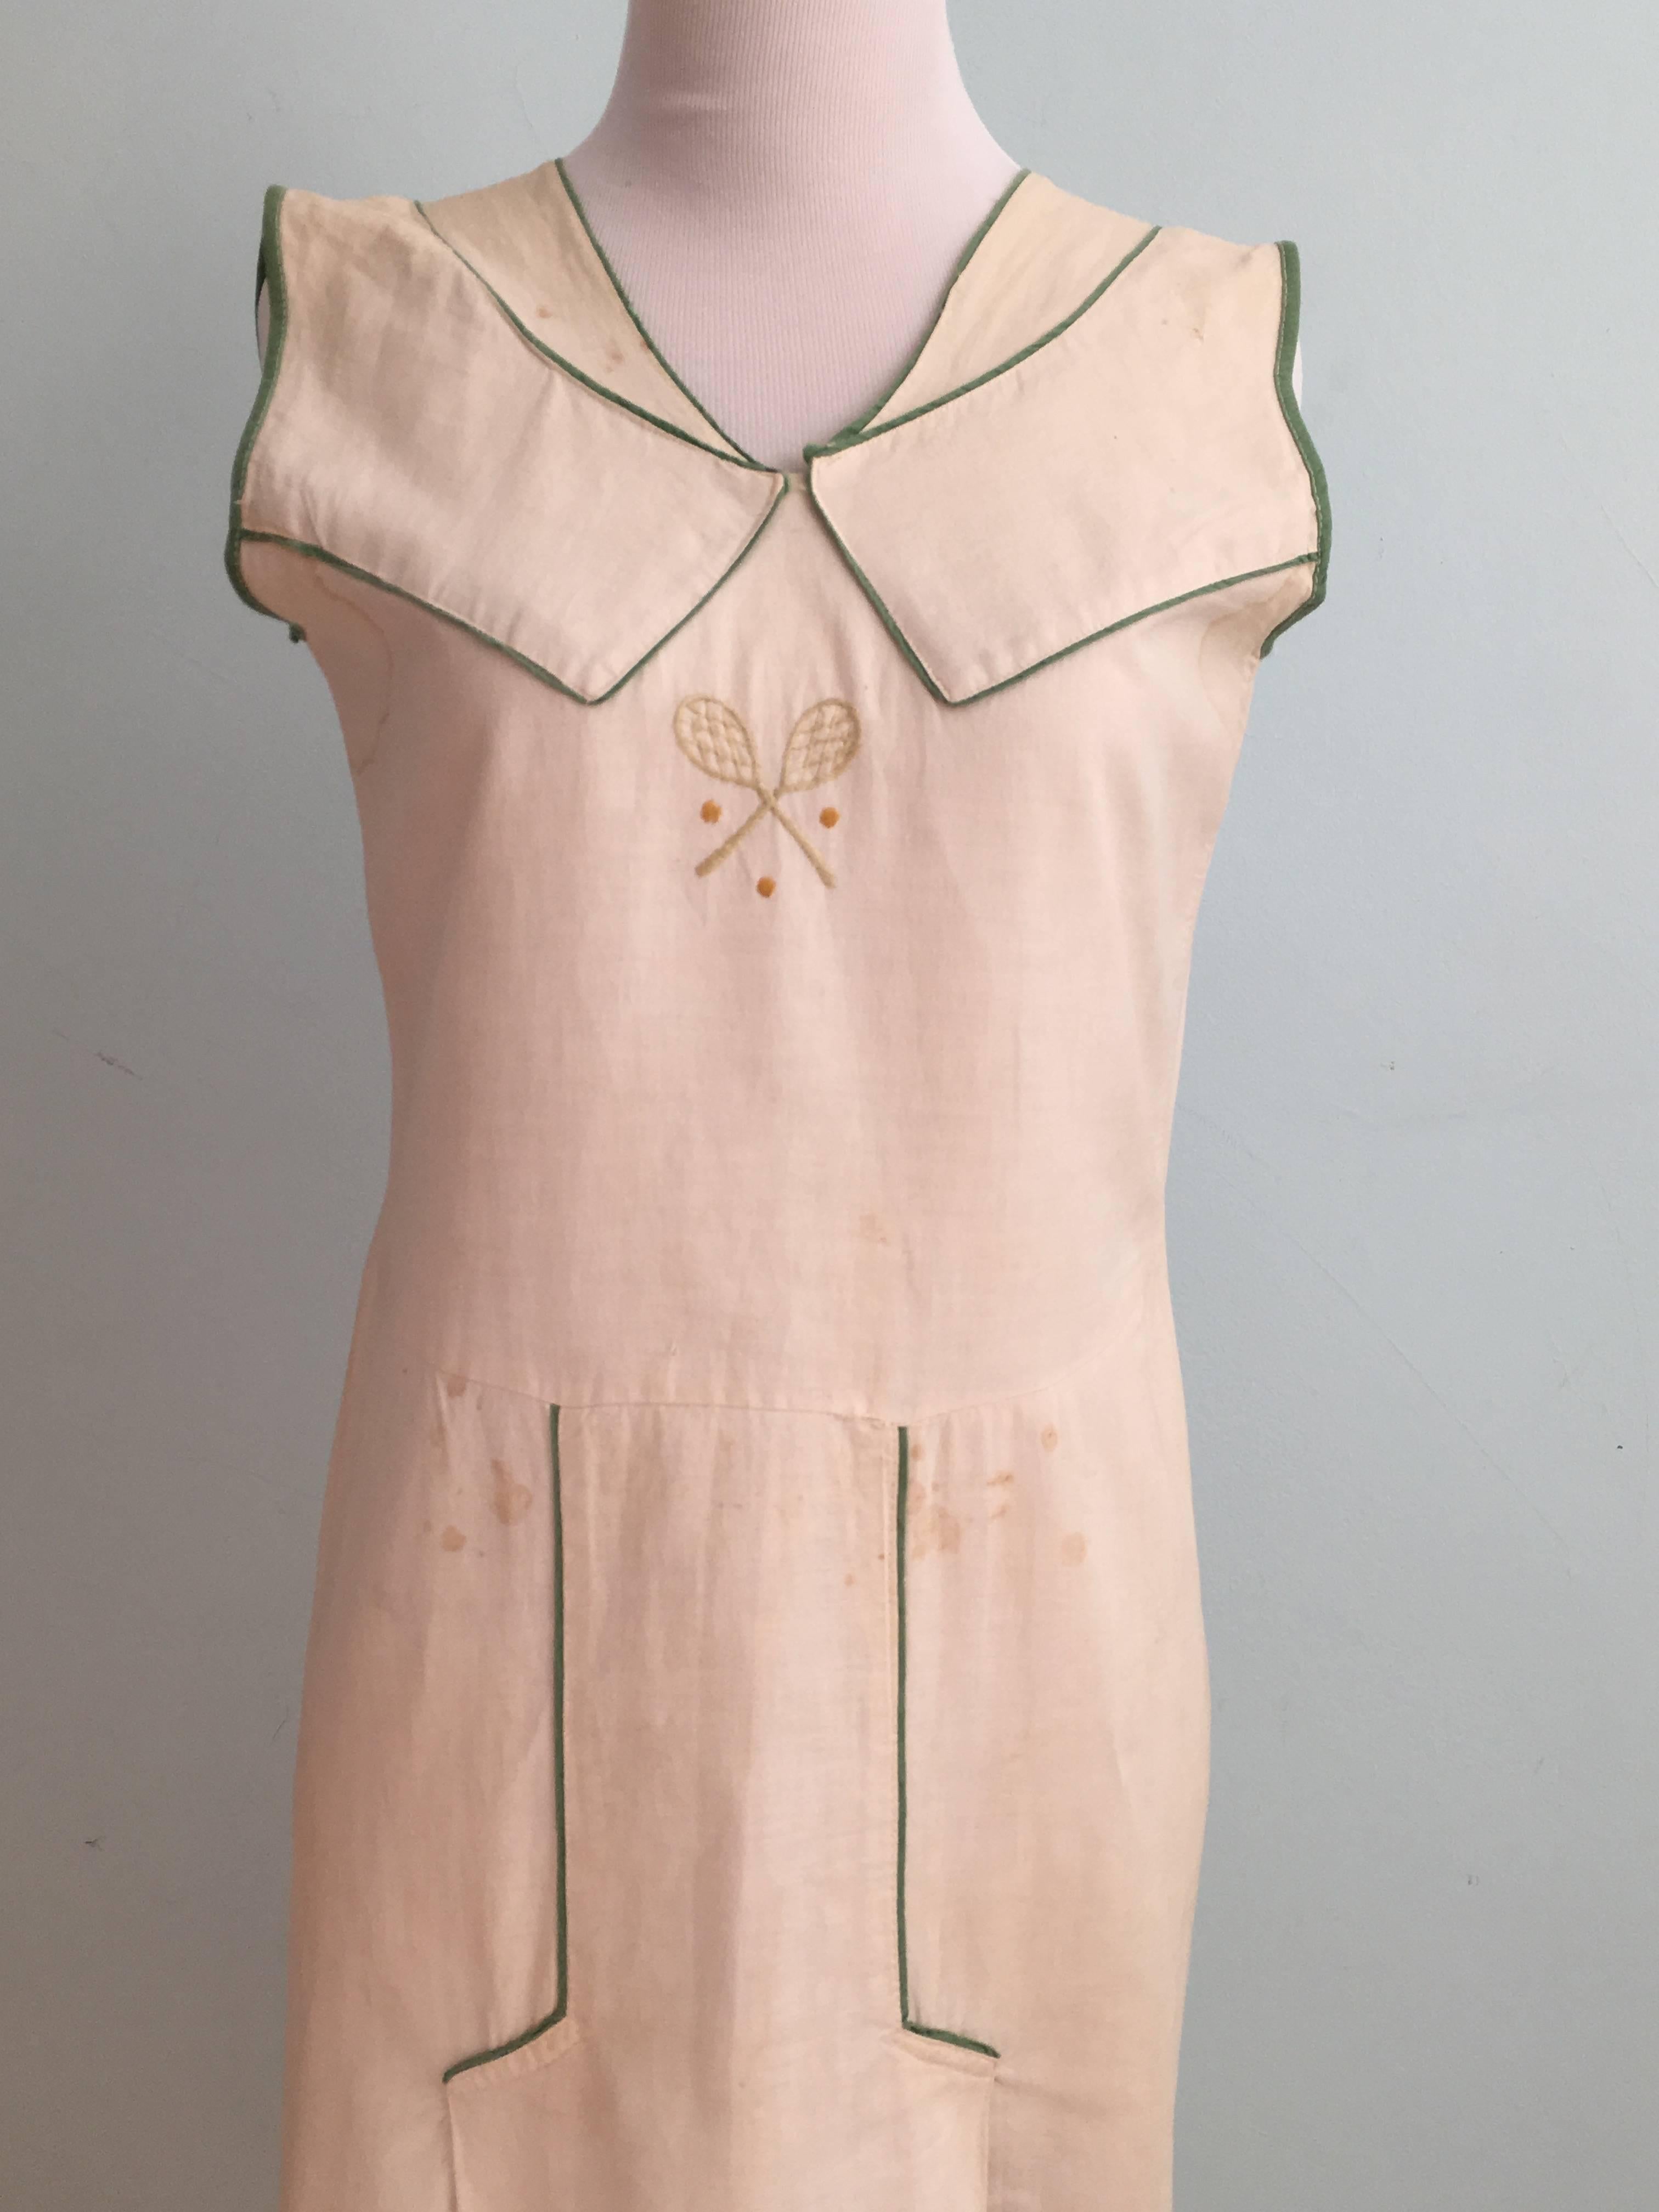 White Cotton Vintage Tennis Dress with Tennis Embroidery, 1920s   In Fair Condition For Sale In Chicago, IL